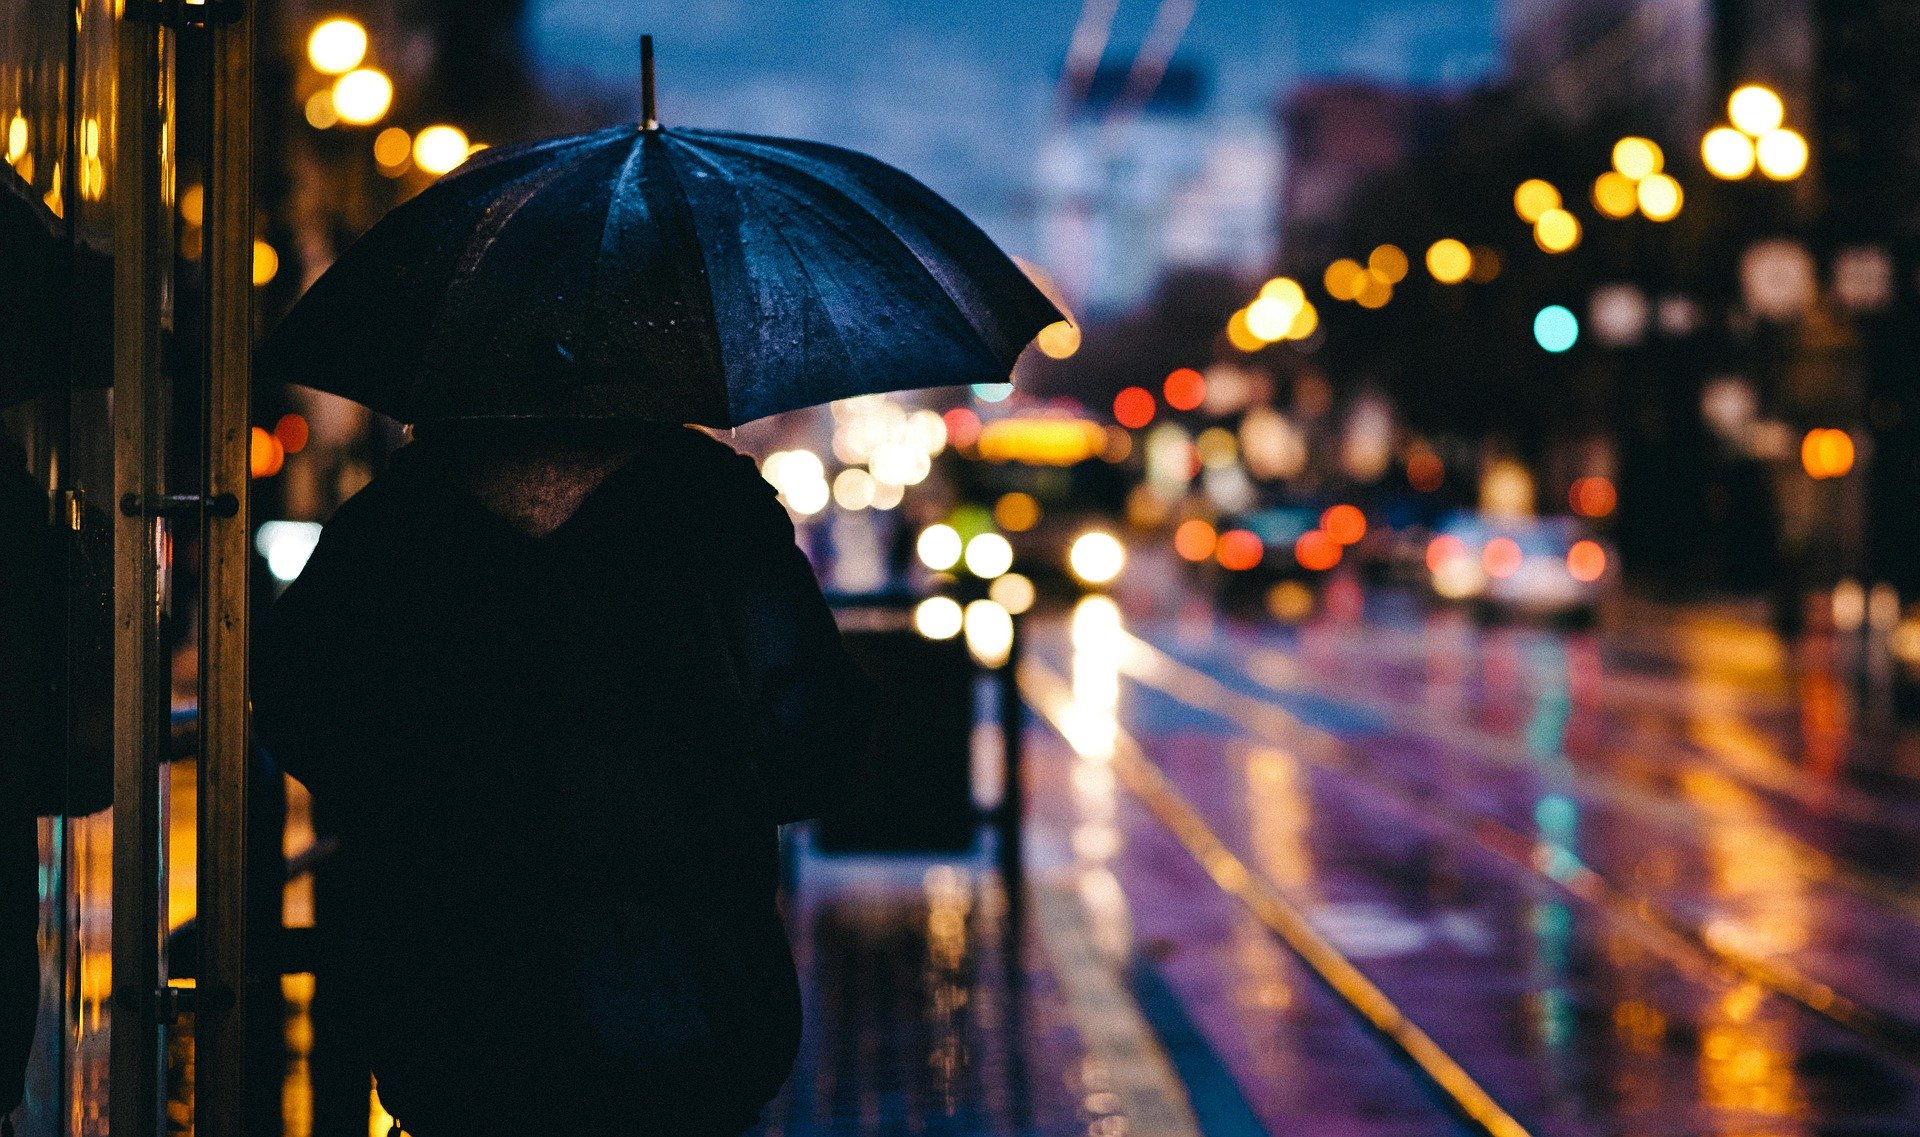 adult facing away from the camera with an umbrella in a city of blurred lights